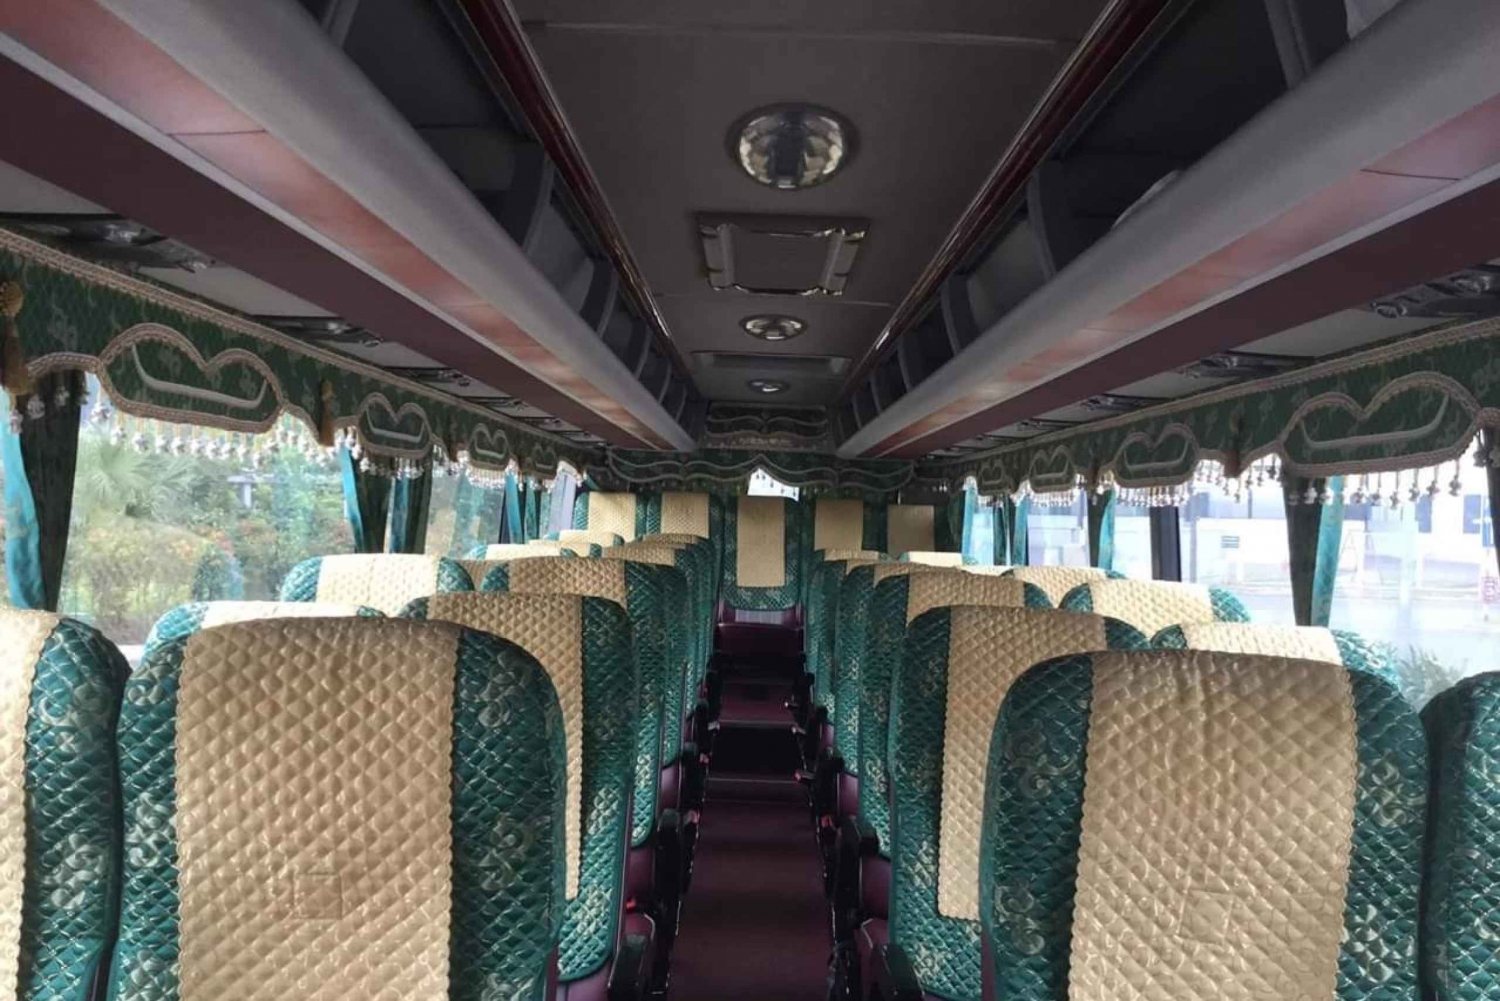 From Ninh Binh to Cat Ba Island by tourist hight quality bus